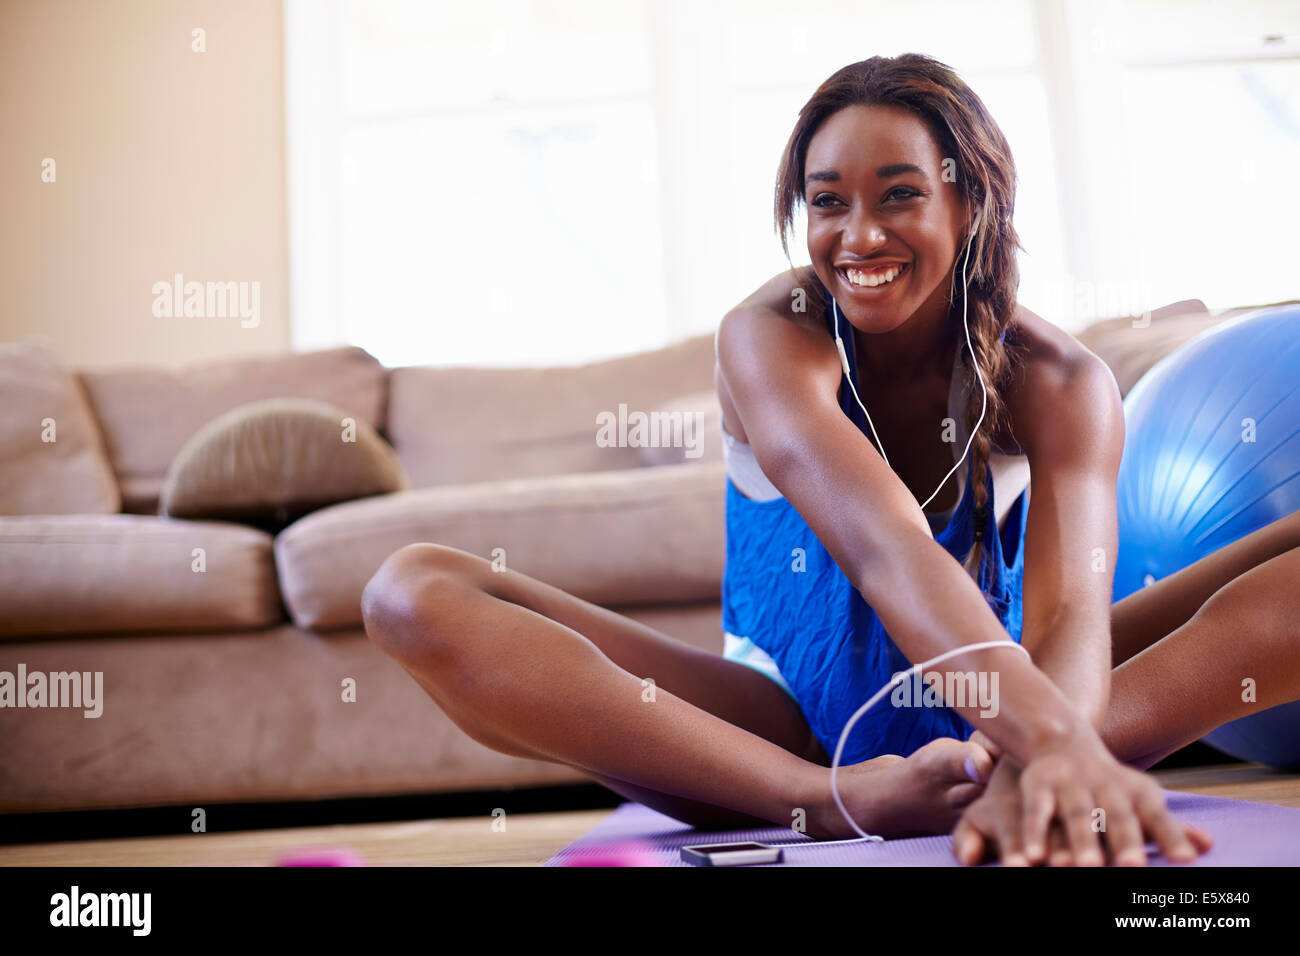 Young woman exercising and stretching on sitting room floor Stock Photo